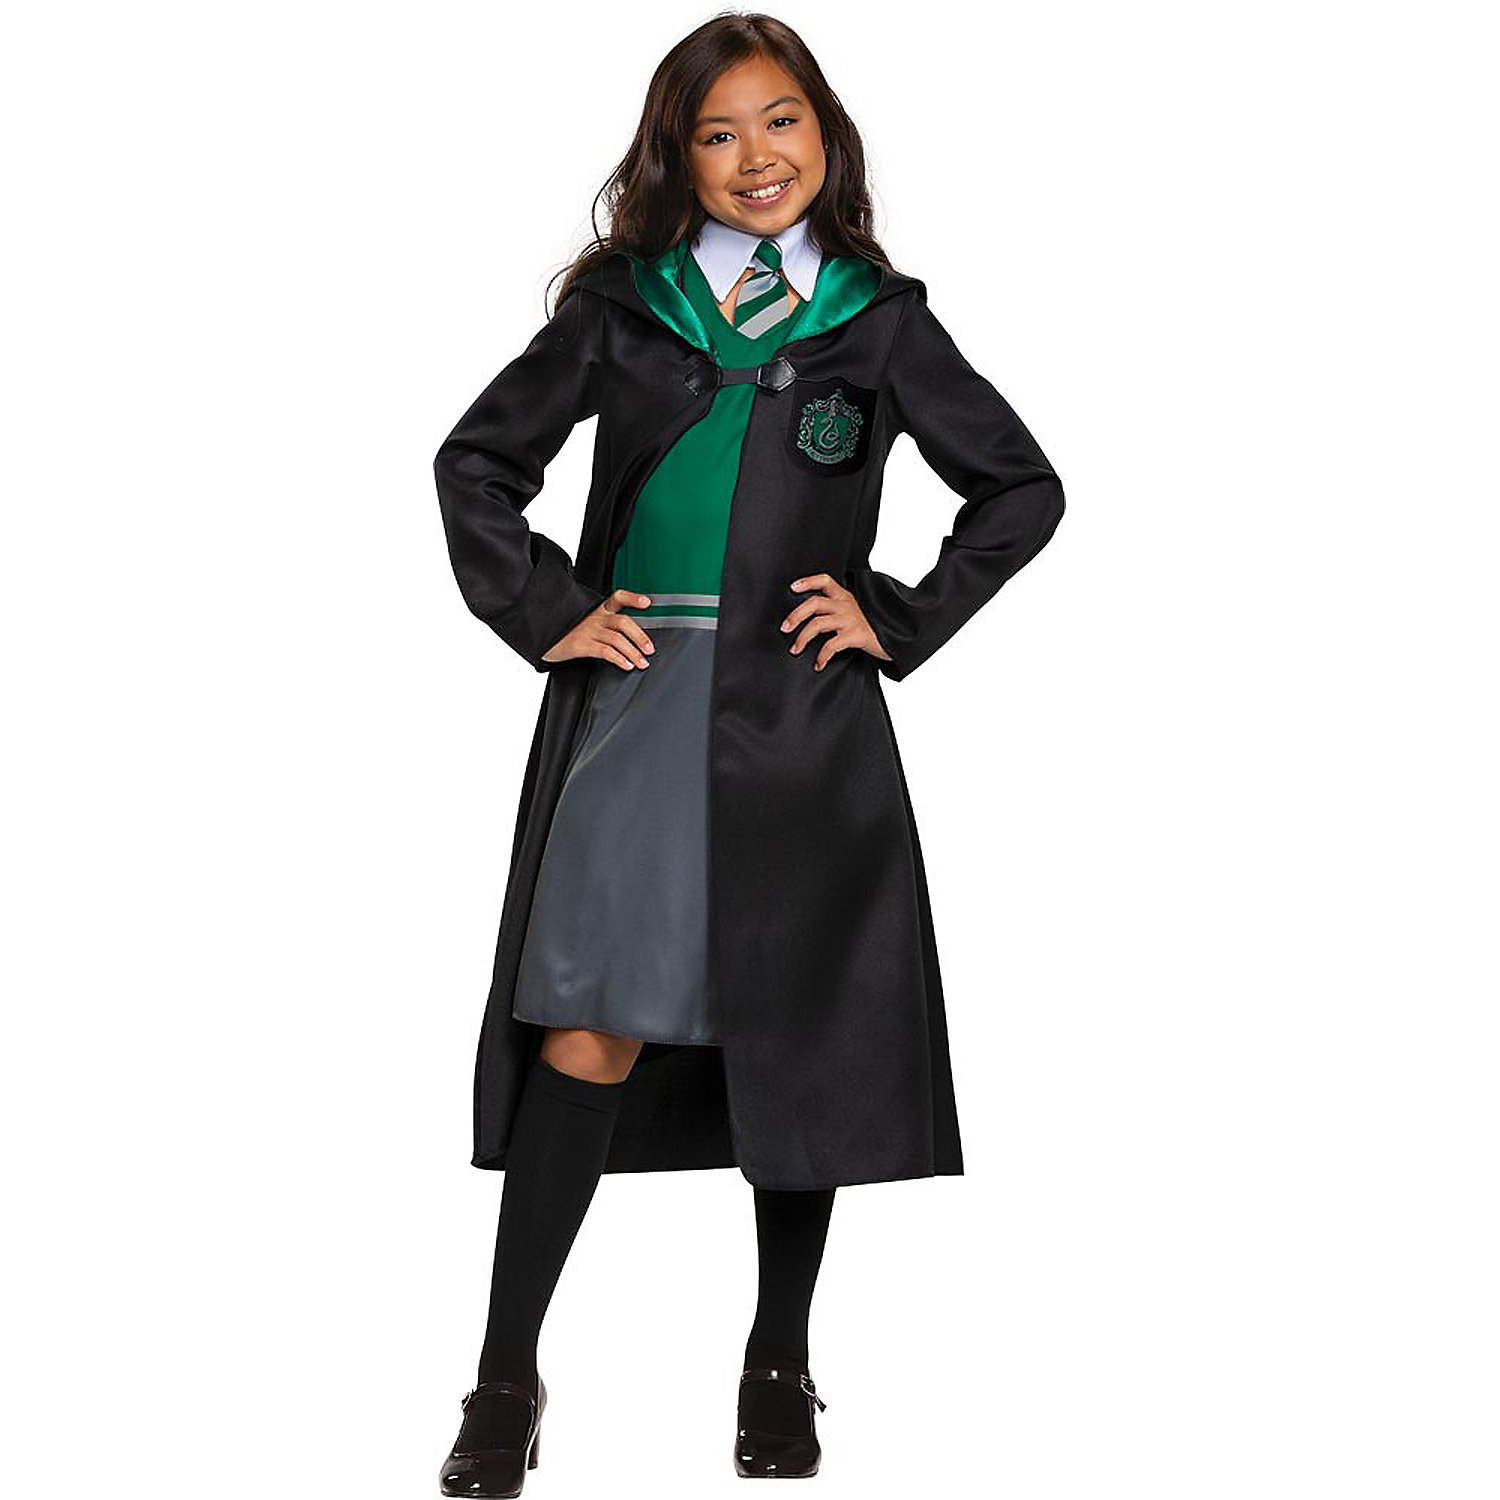  Disguise womens Slytherin Adult Sized Costumes, Green & Gray,  Small 4-6 US : Clothing, Shoes & Jewelry